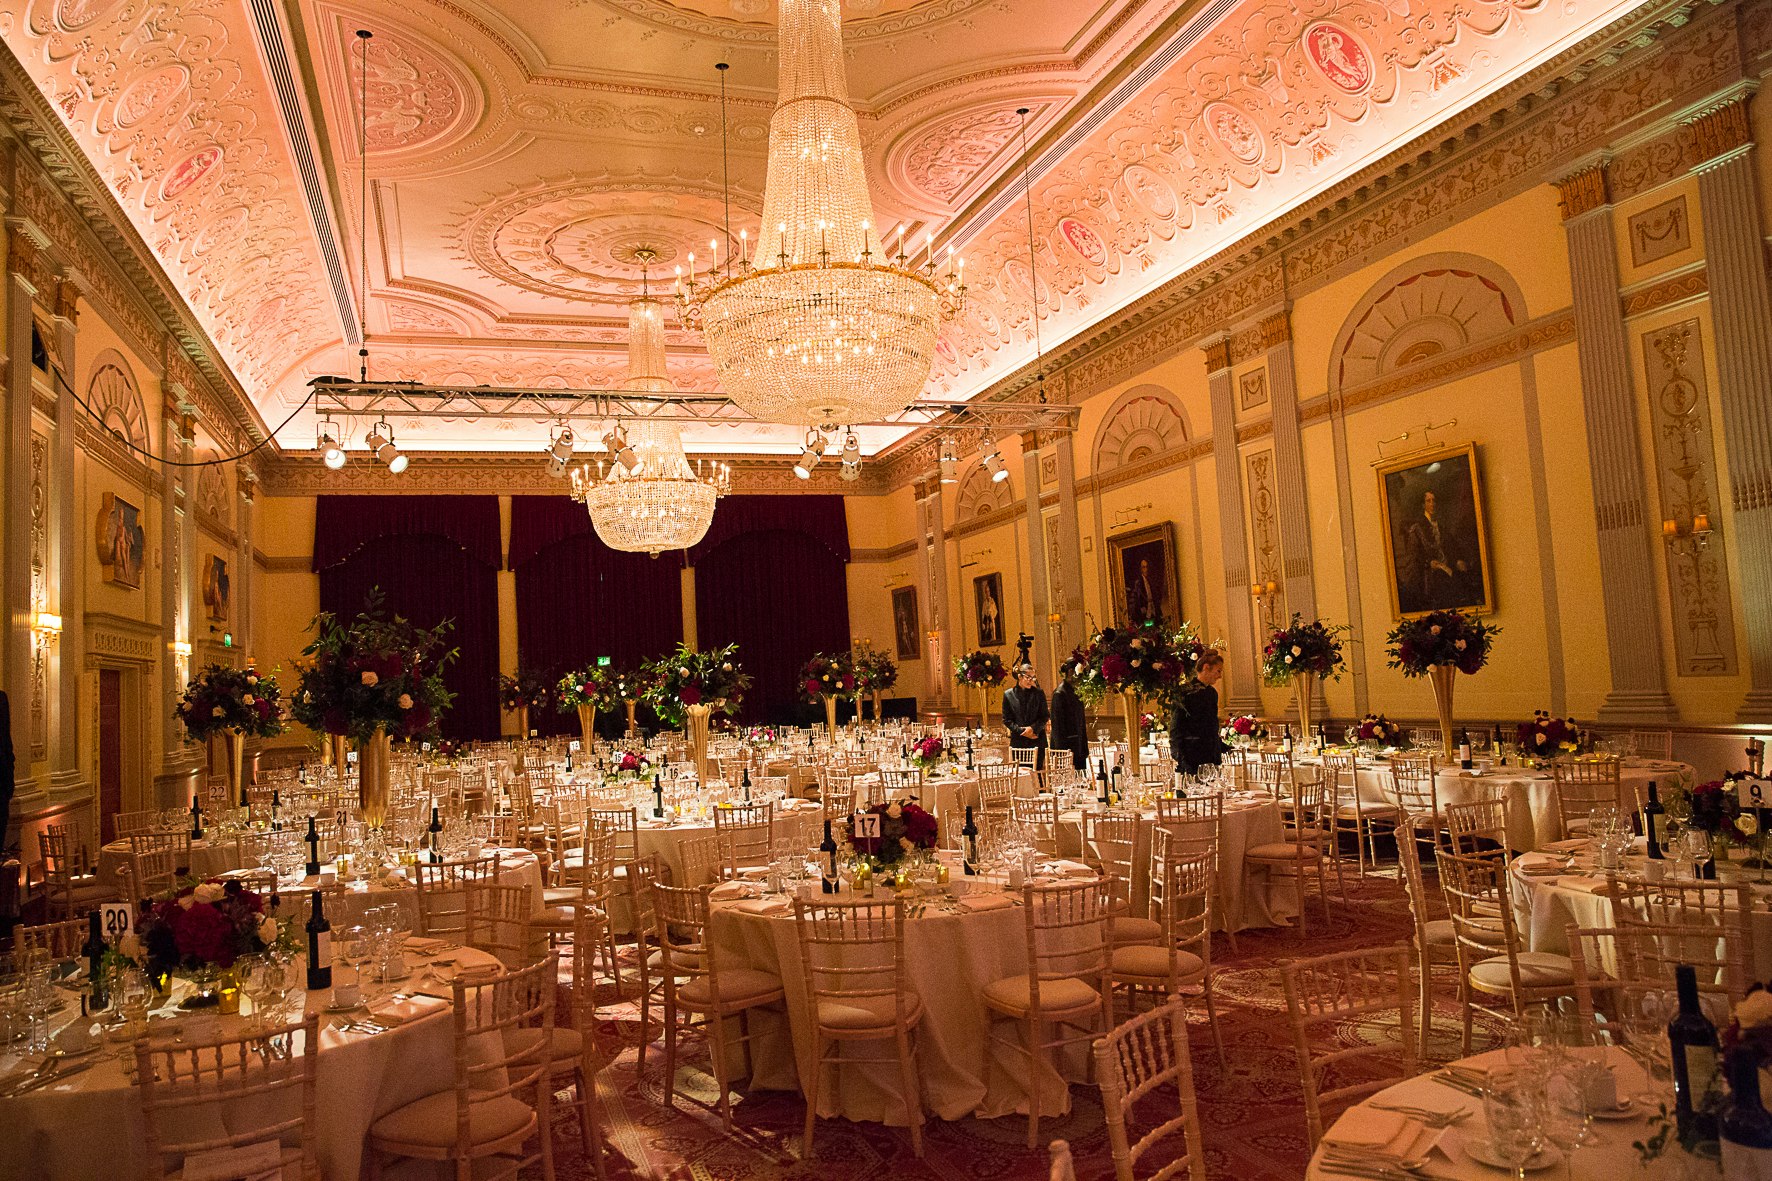 Gala Dinner Venues in London - Plaisterers’ Hall